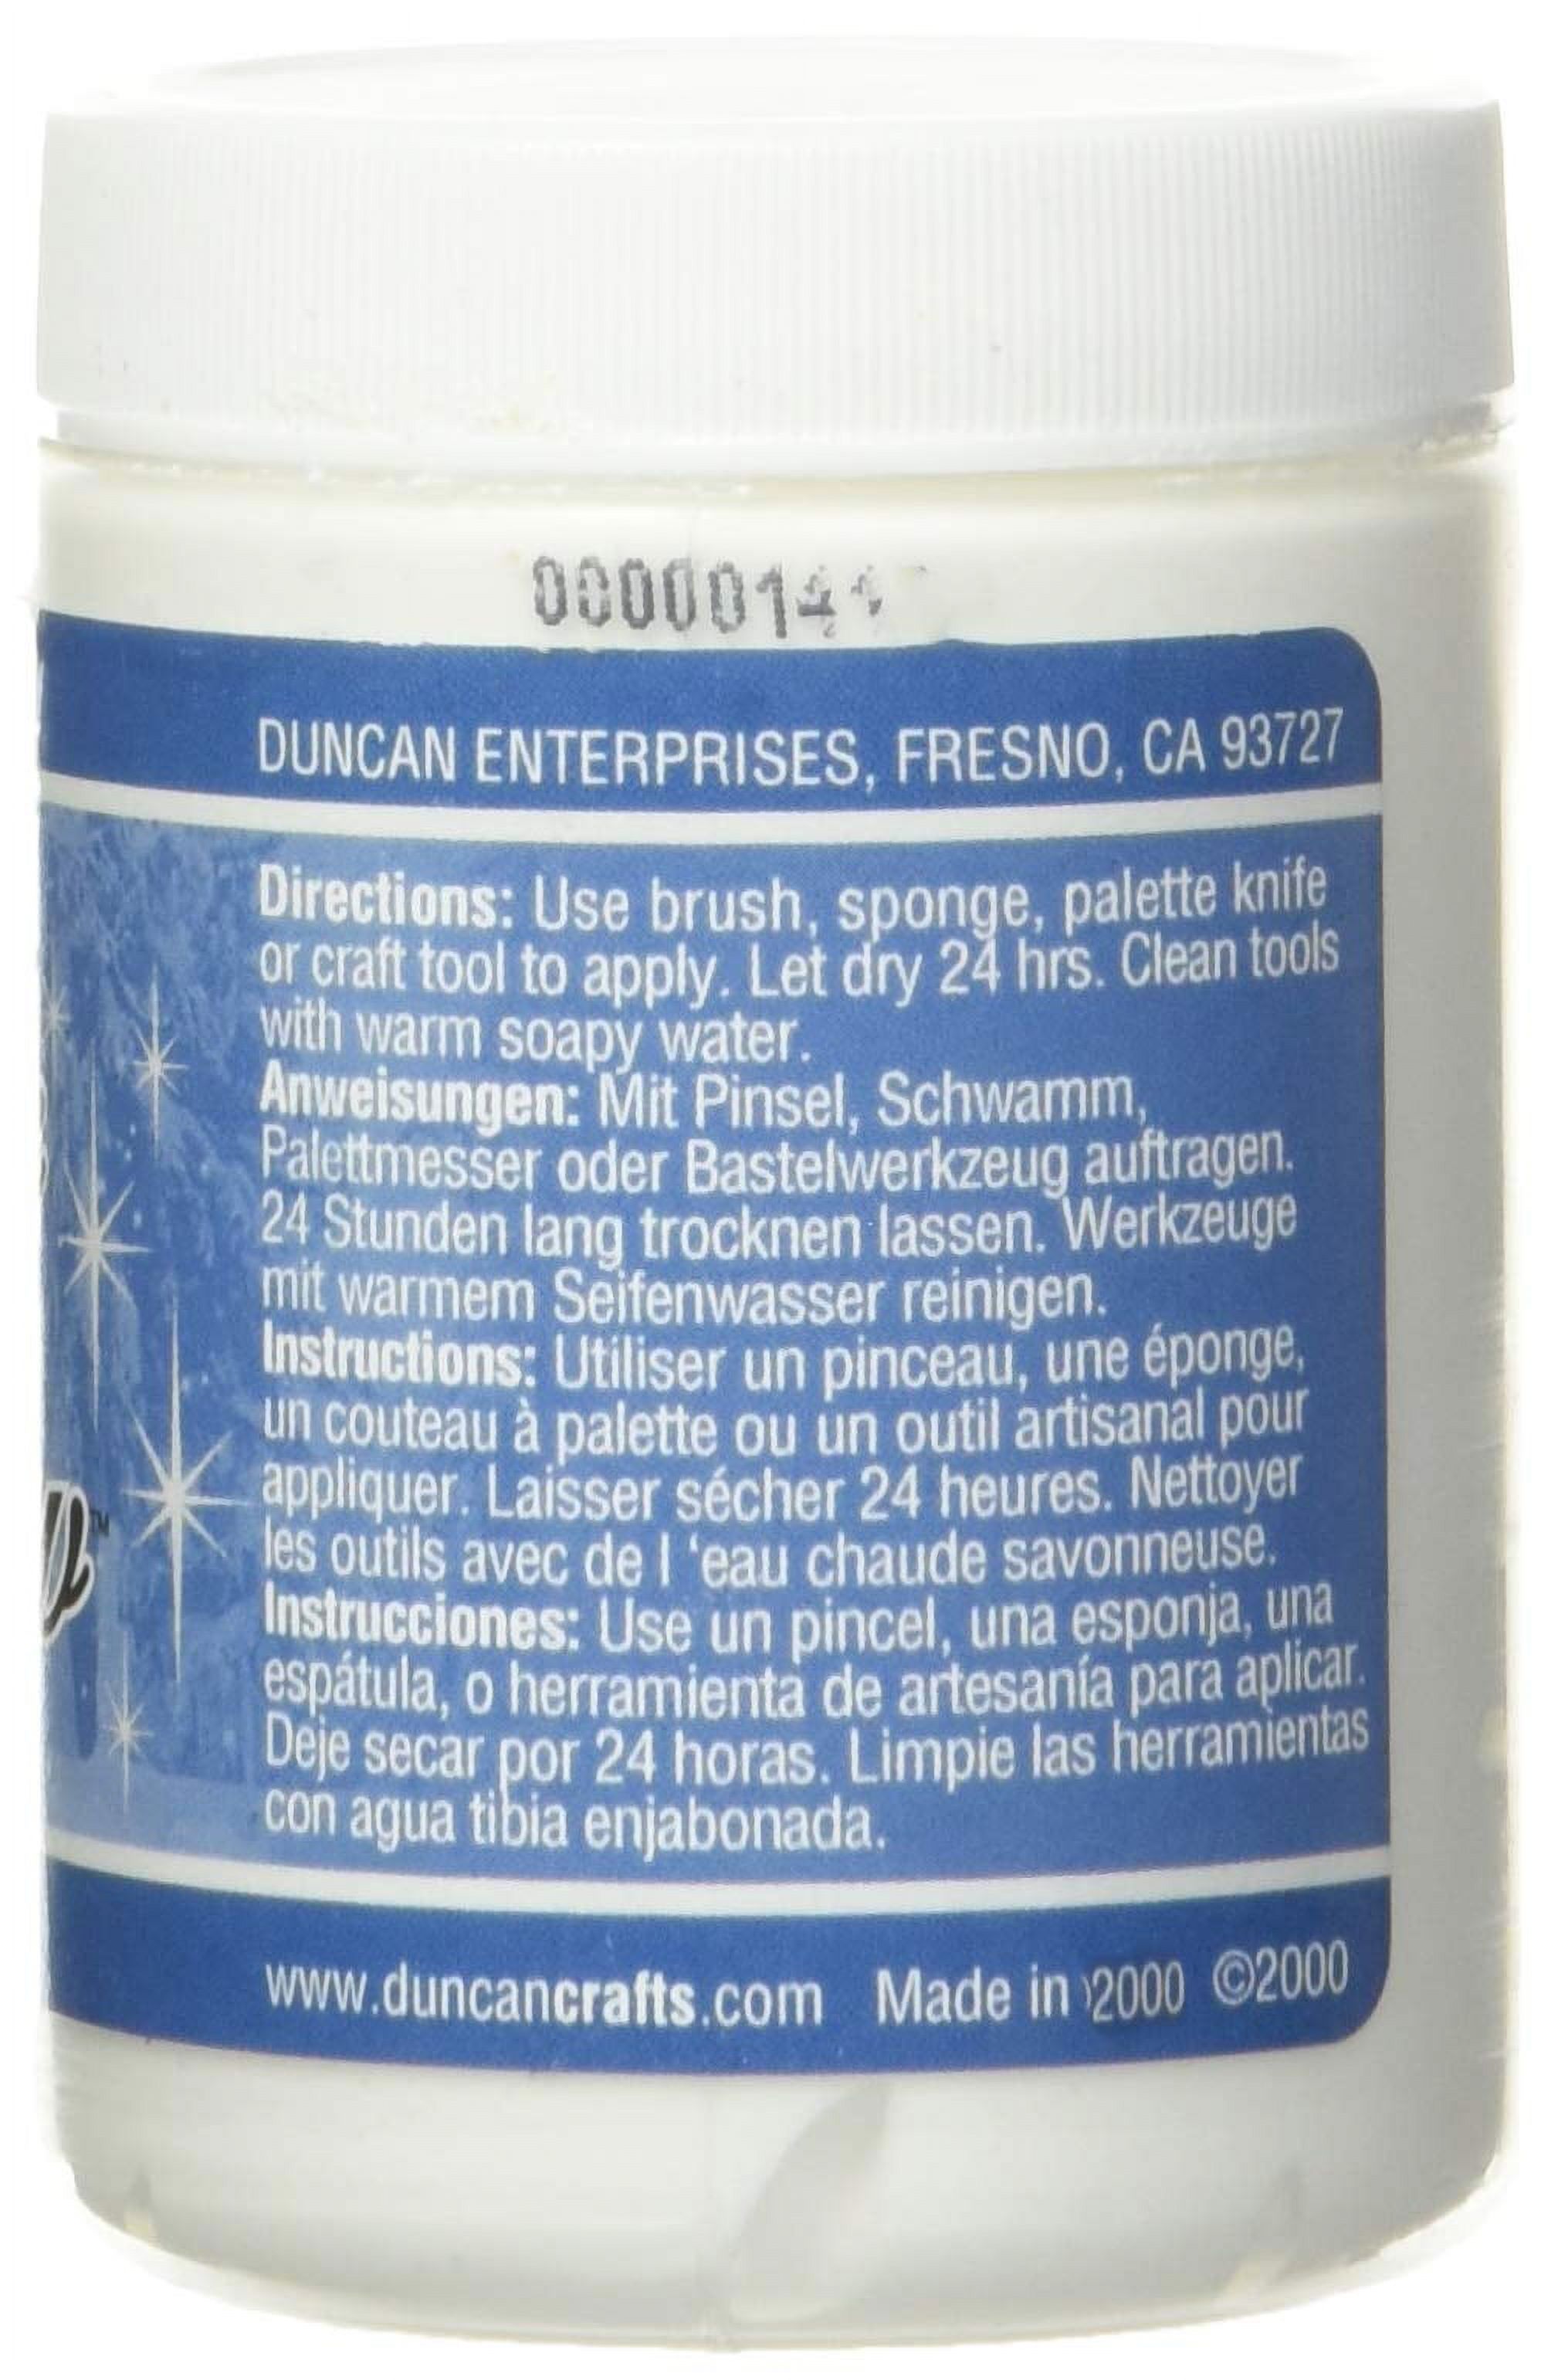 Aleene's Adhesives Bulk Buy Duncan Crafts Snow Glitter Paint 4 Ounces SP408 3-Pack - image 2 of 5